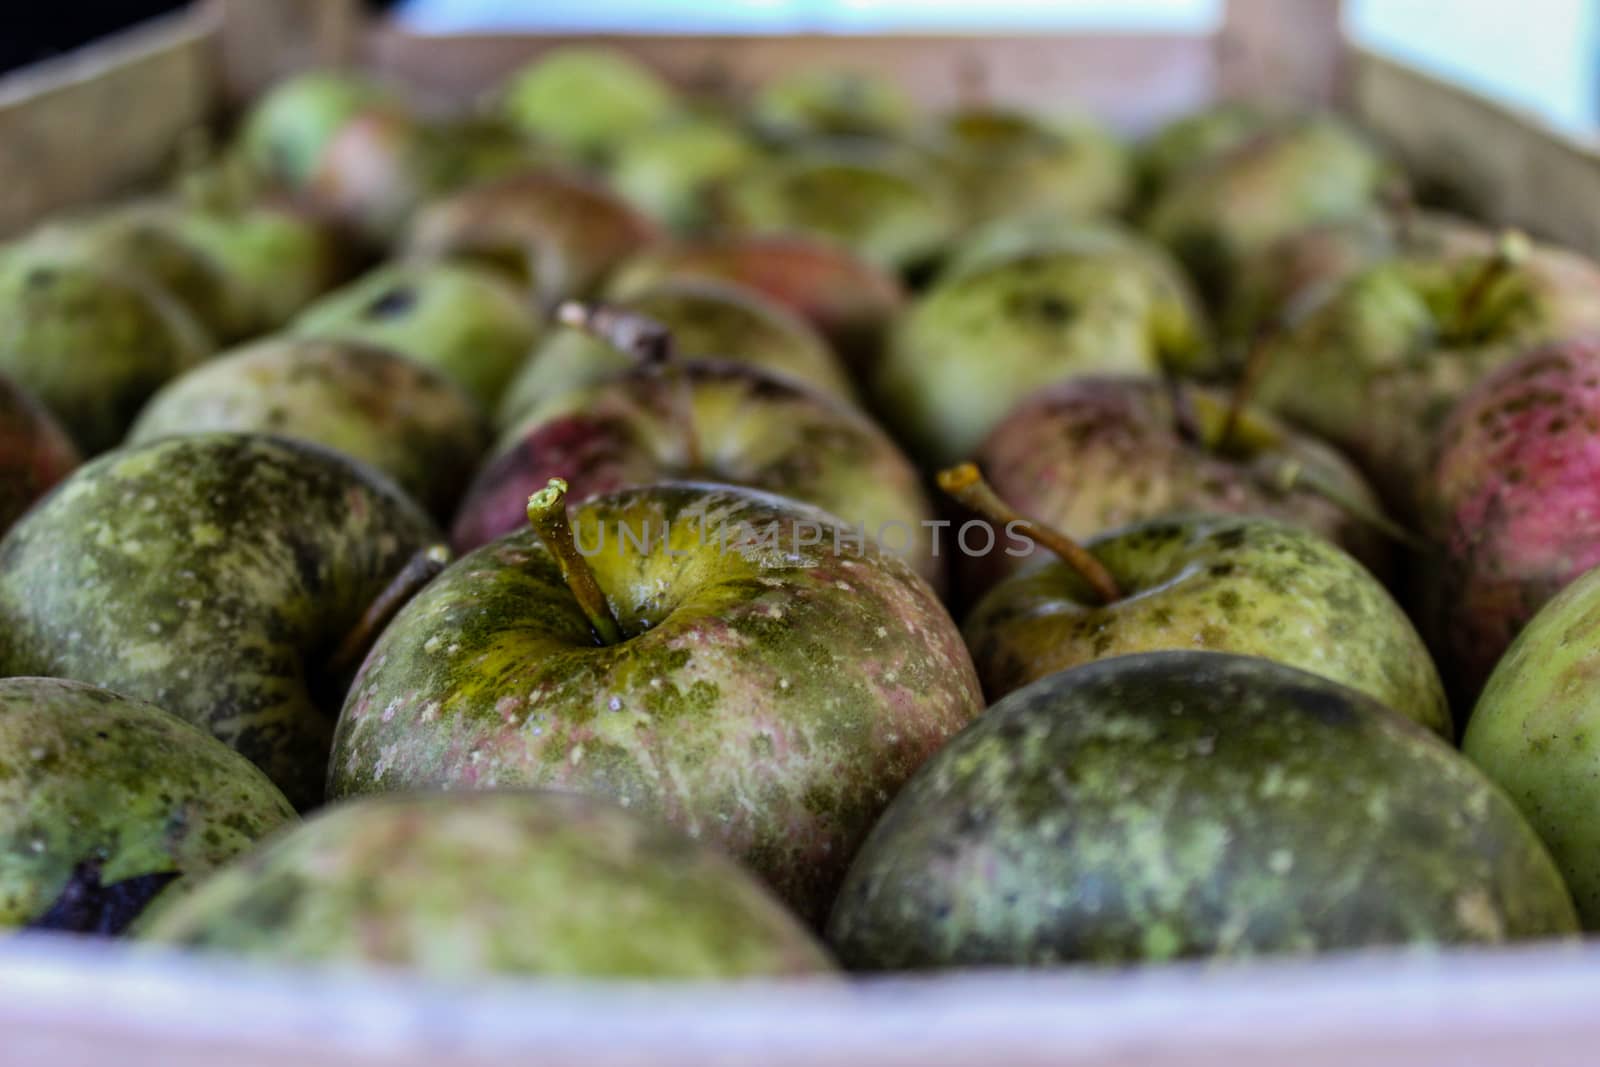 Homemade apples of different sizes perfectly stacked in a crate. Apples have various stains and markings on them. by mahirrov